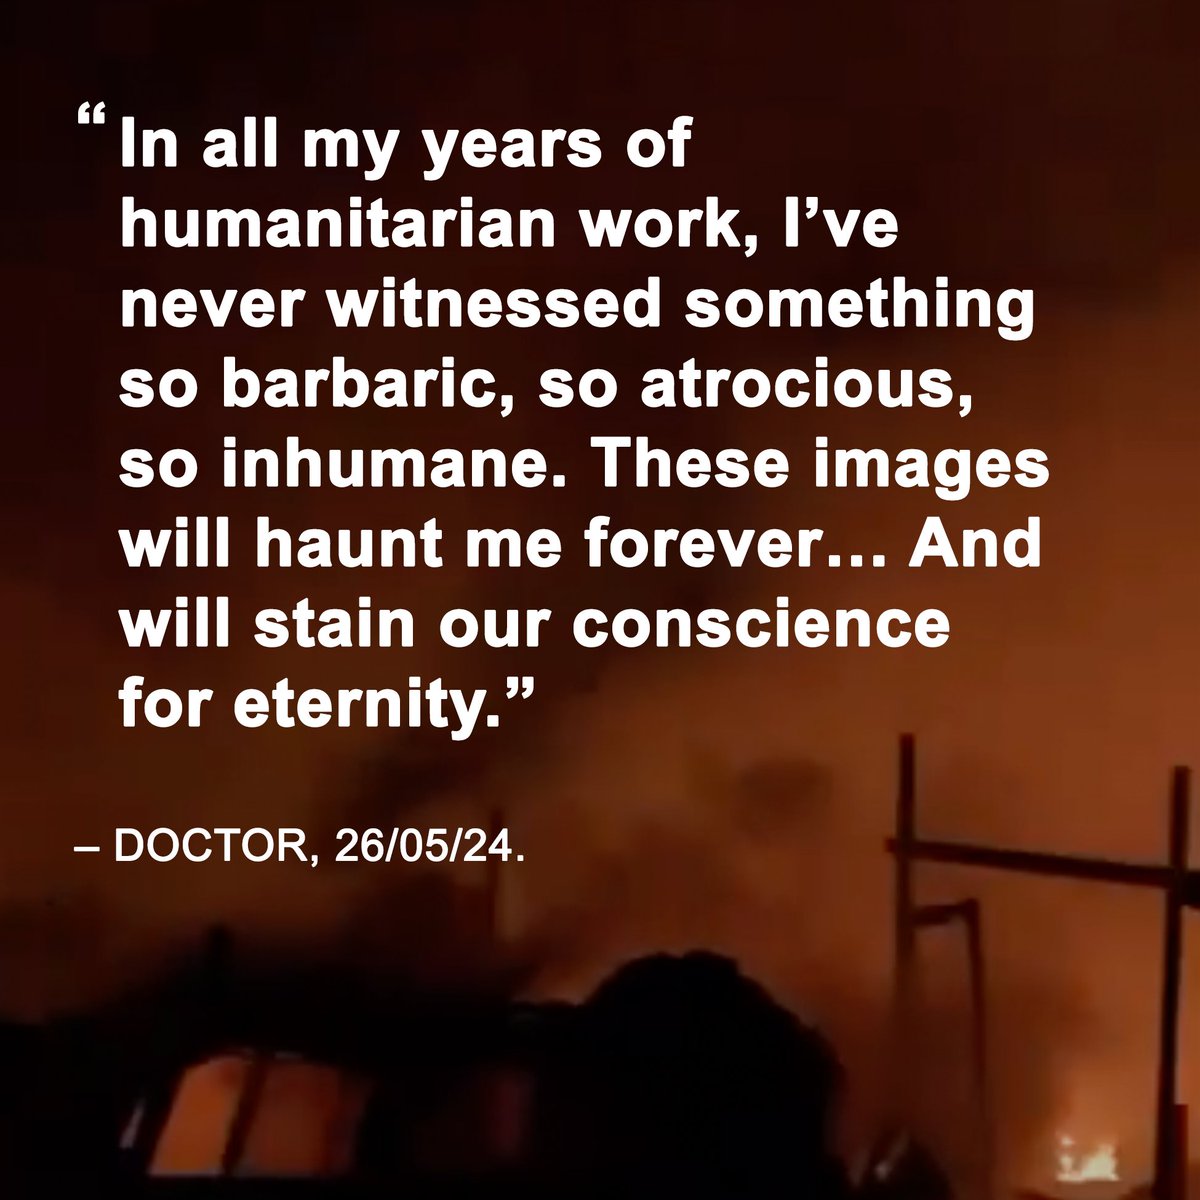 As people’s charred remains are pulled from burning tents in Rafah and scores of others with horrific injuries are transported to hospital, a doctor who was volunteering in Gaza sent this message.